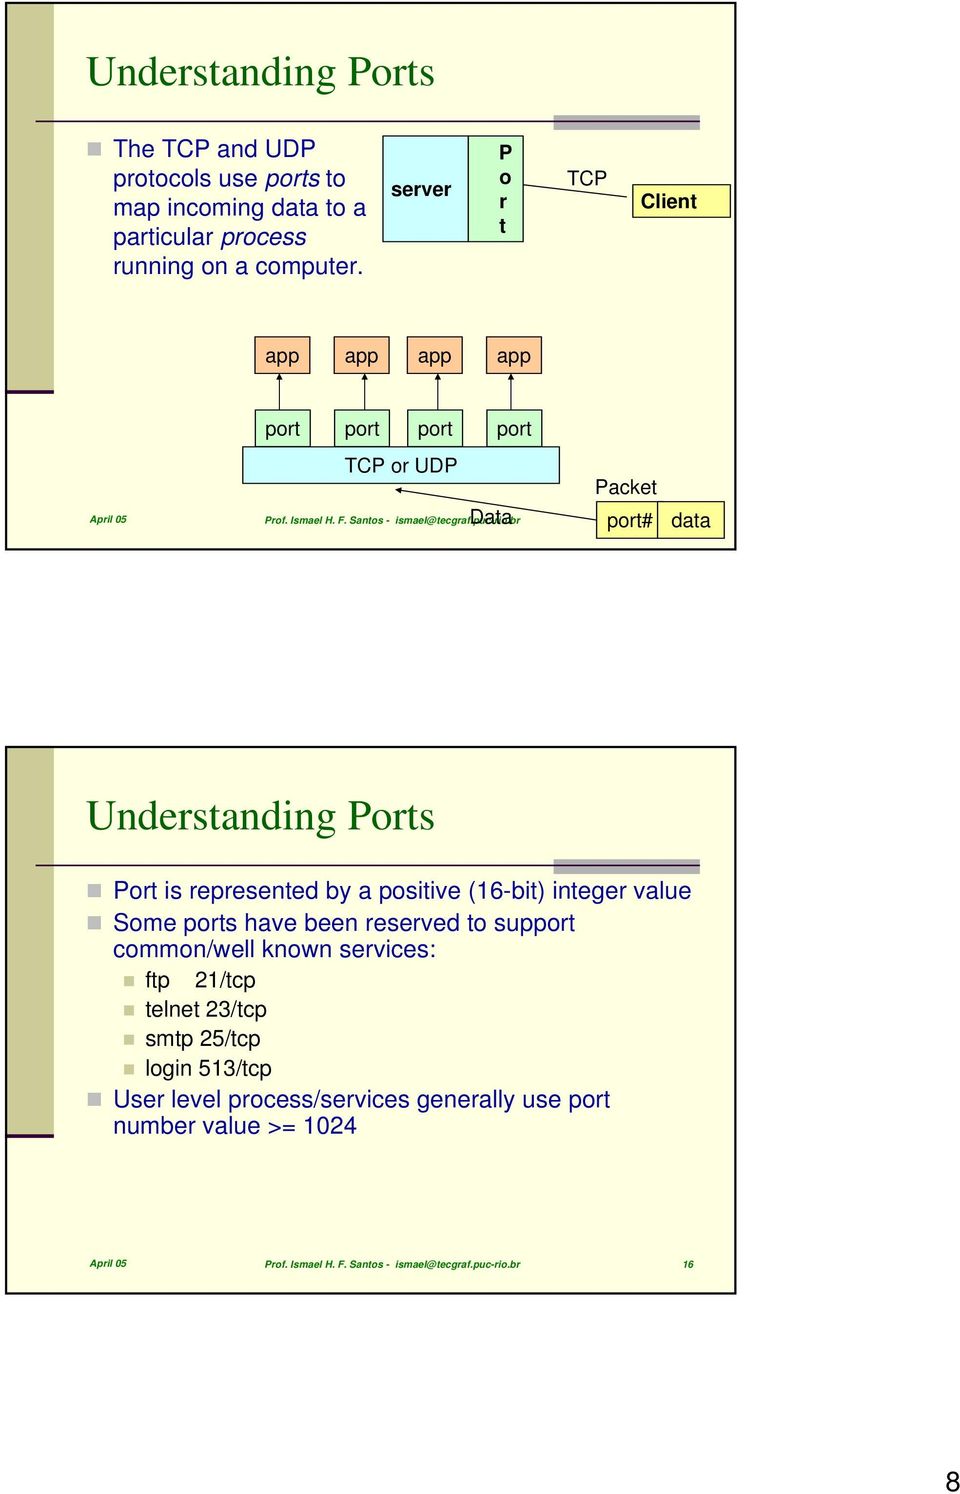 br 15 data Understanding Ports Port is represented by a positive (16-bit) integer value Some ports have been reserved to support common/well known